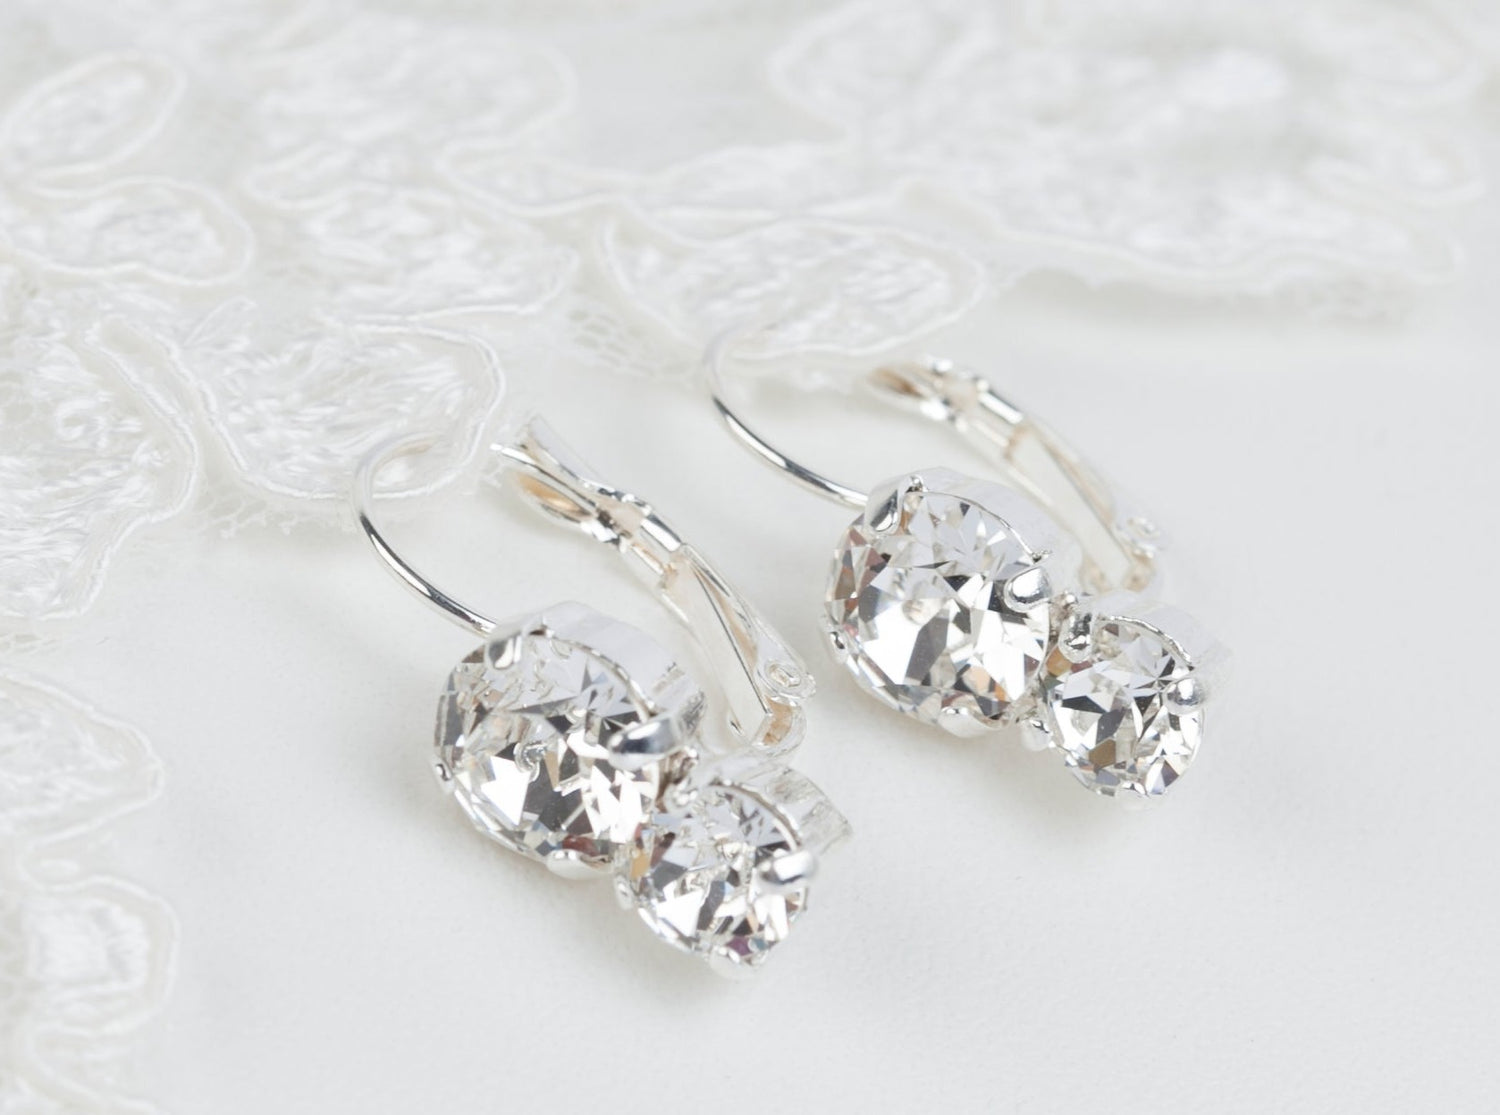 A pair of crystal leverback earrings in a style  for brides or bridesmaids. Two sparkling Austrian crystals hang frrom the earrings in a simple design that is not too large or heavy.